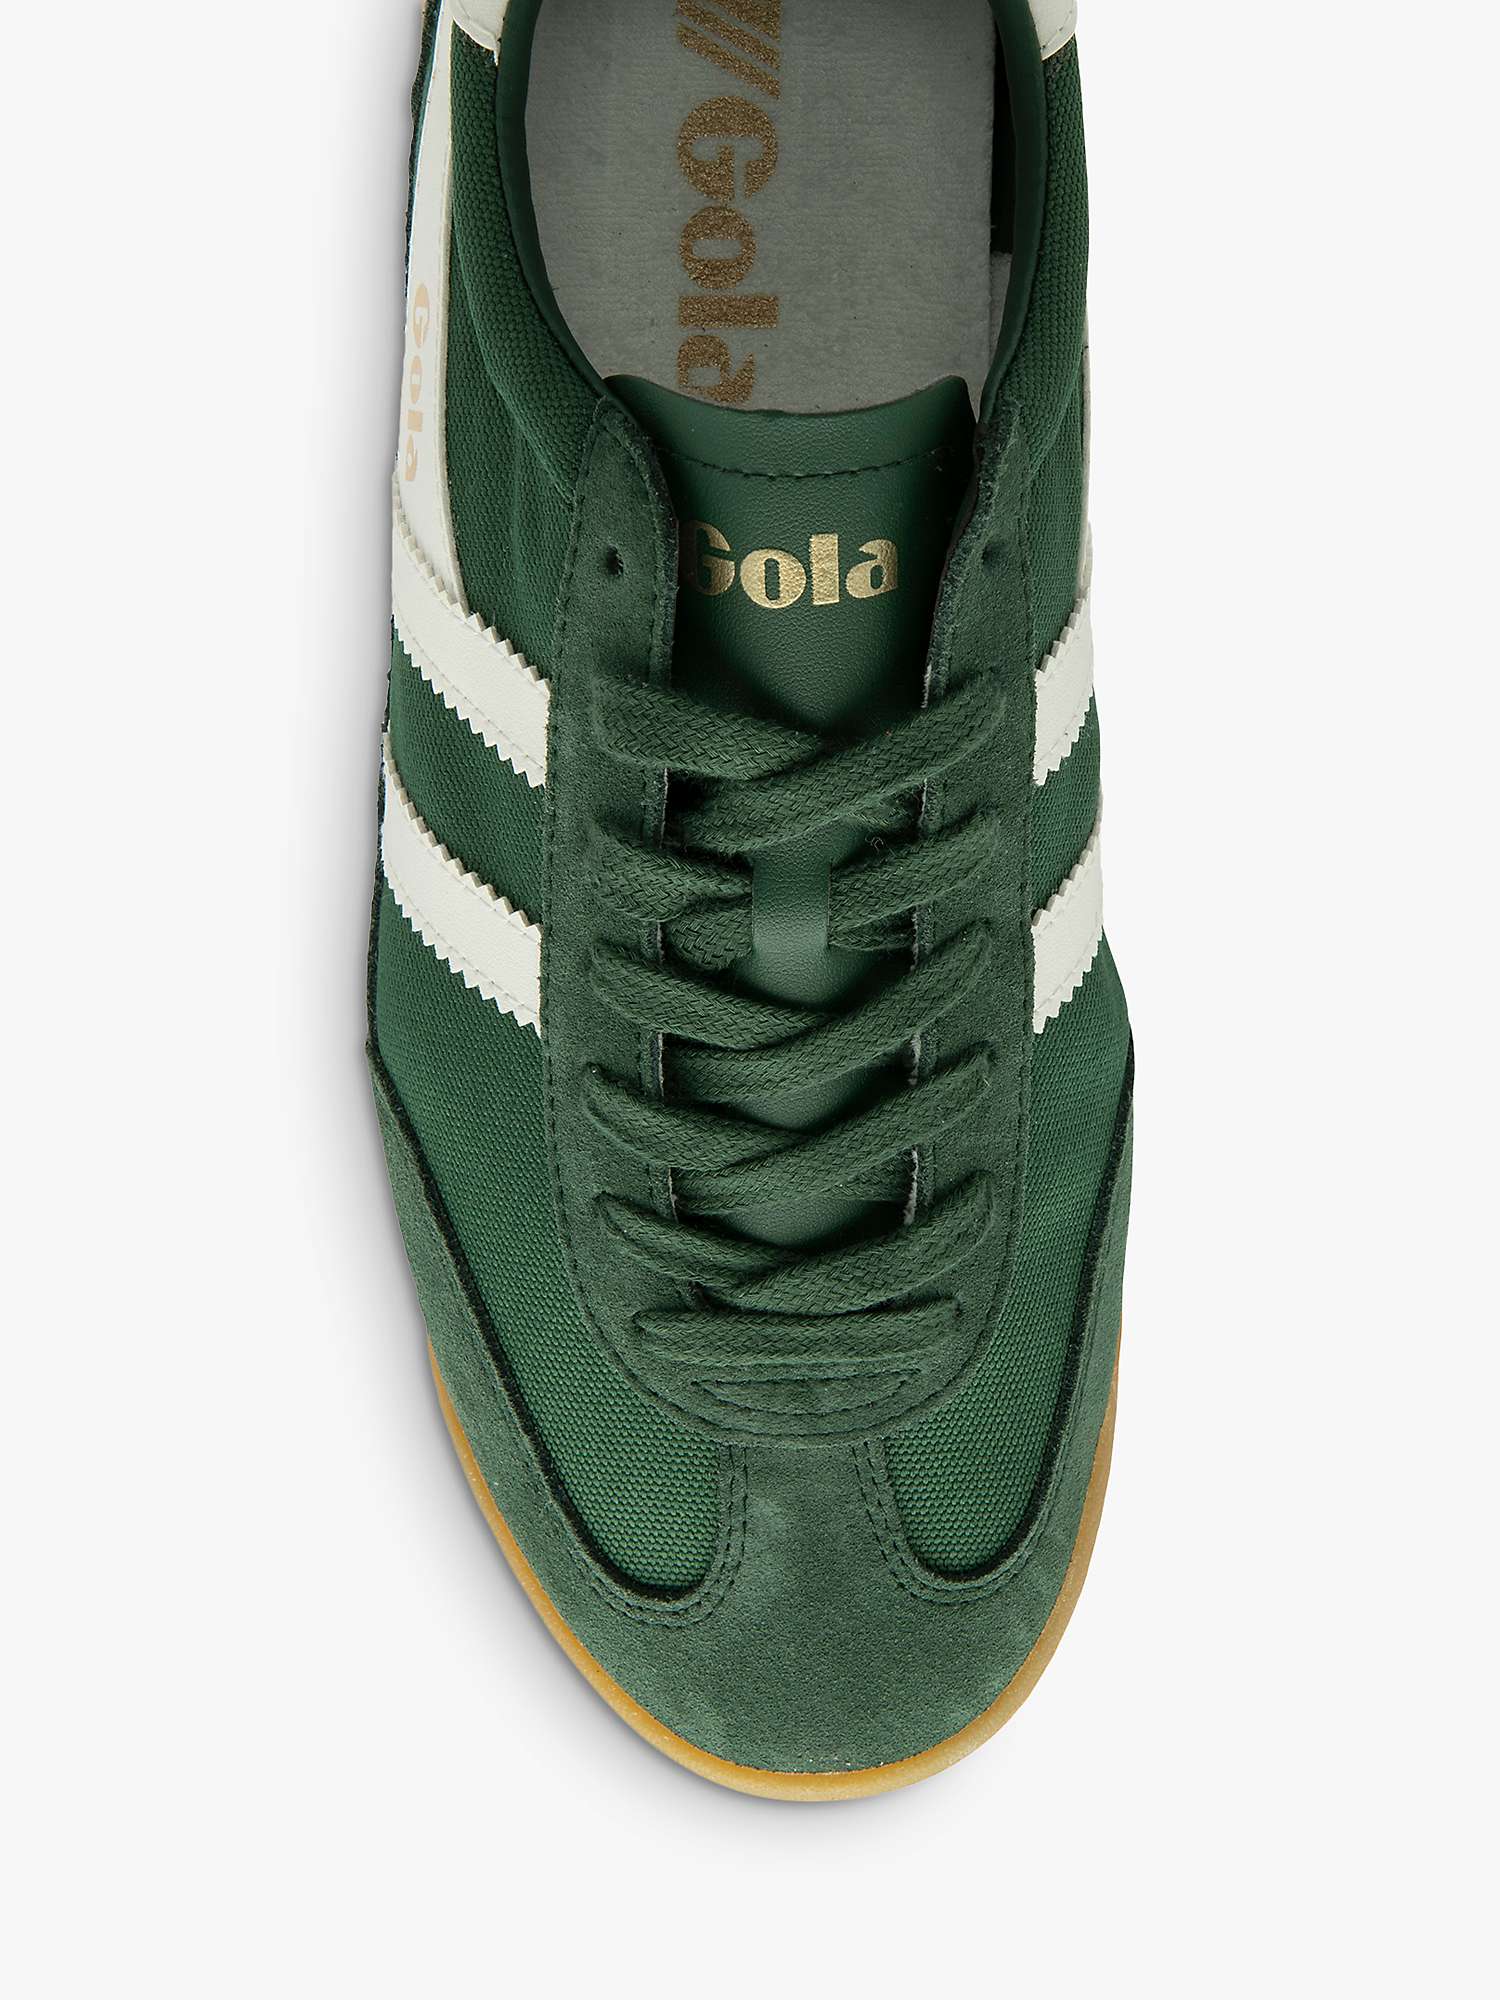 Buy Gola Classics Tornado Lace Up Trainers Online at johnlewis.com